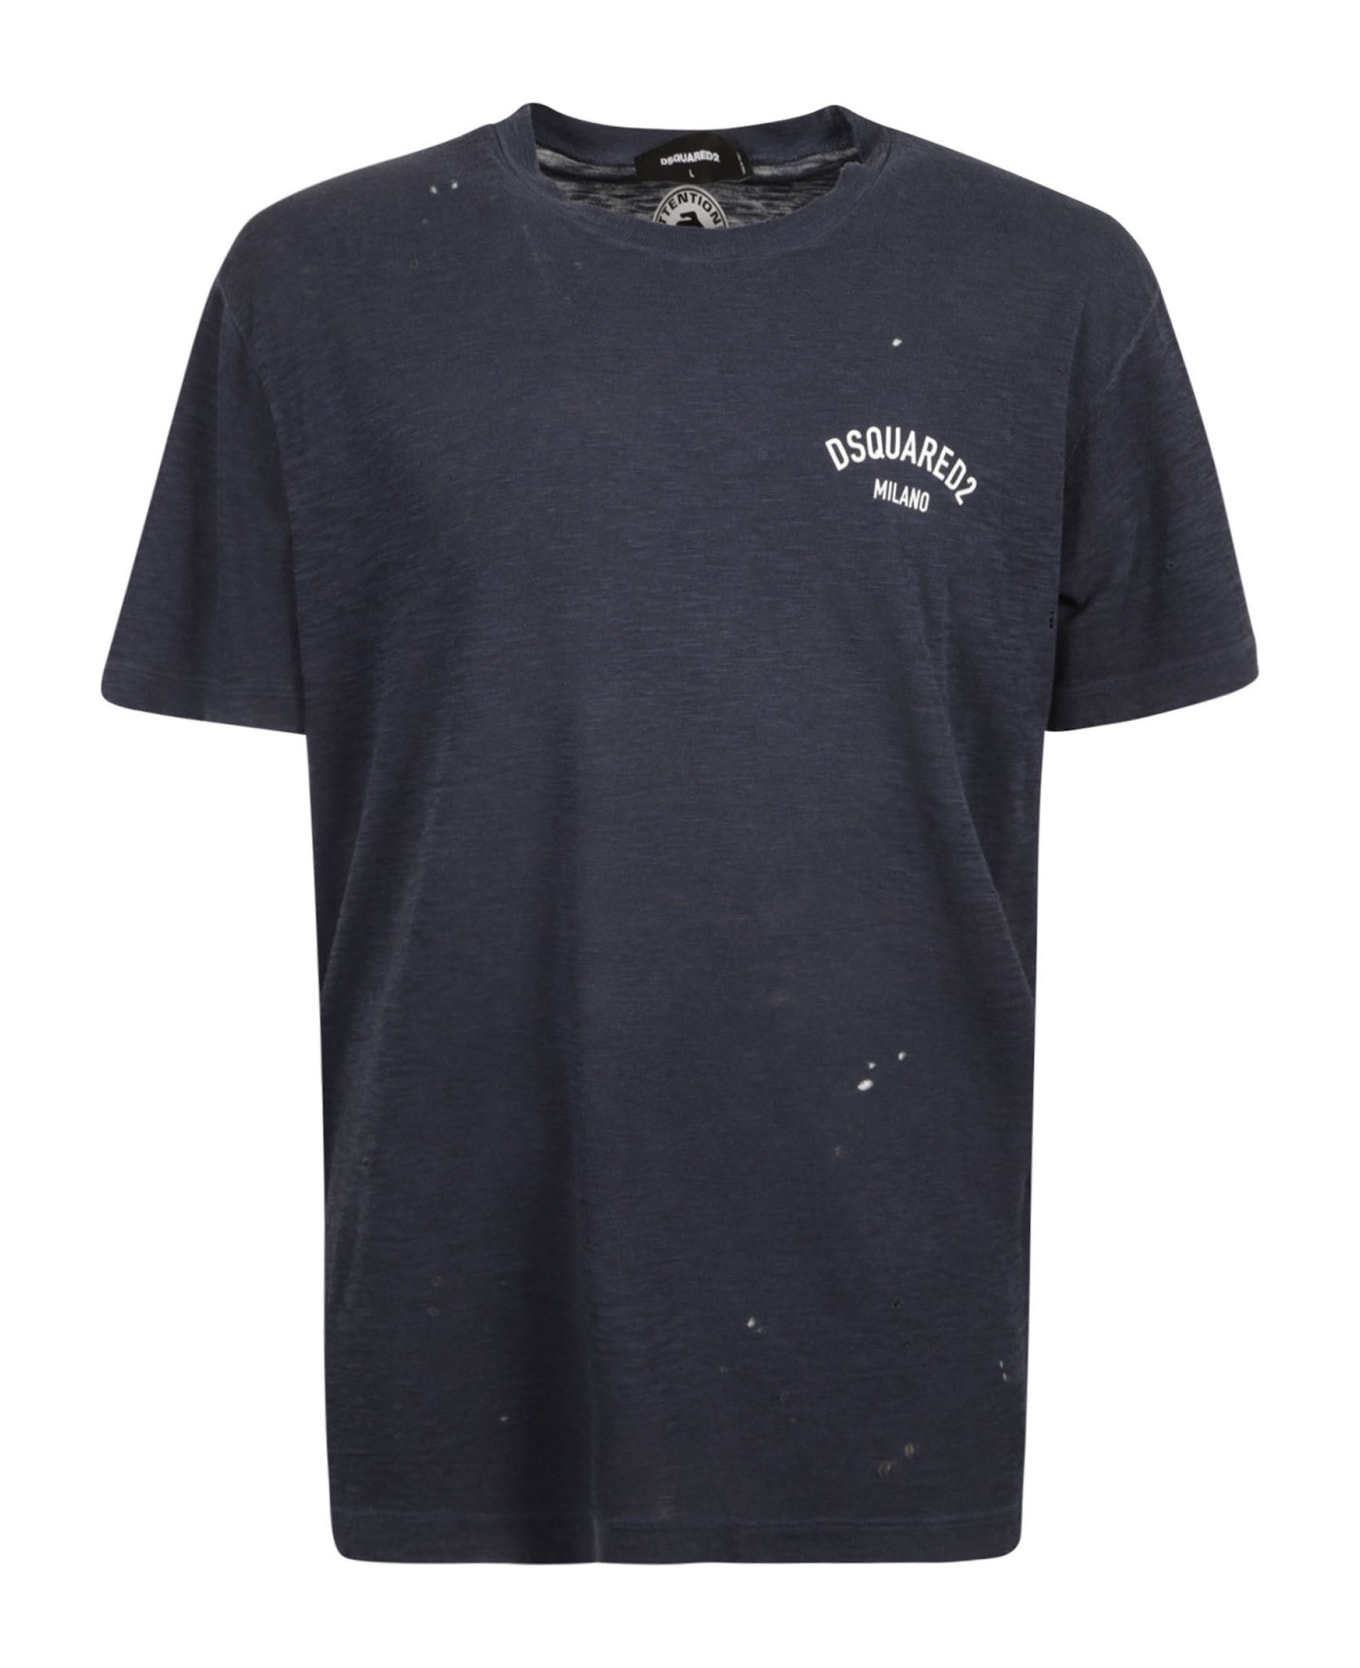 Dsquared2 Cool Fit T-shirt - NAVY BLUE